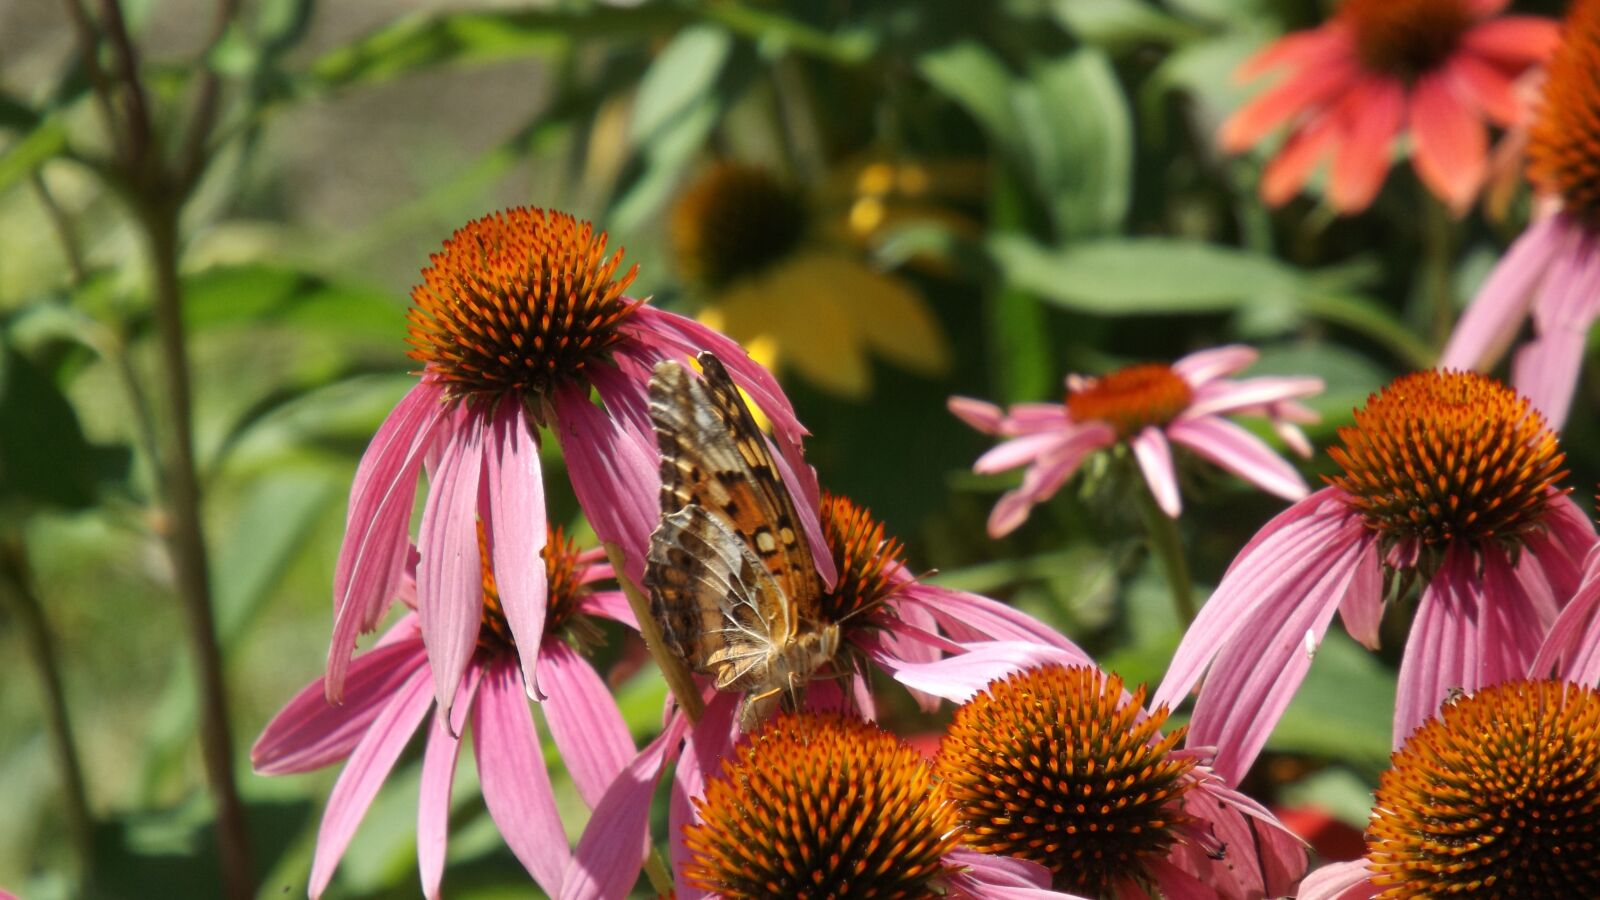 Fujifilm FinePix S4800 sample photo. Nature, butterflies, insect photography